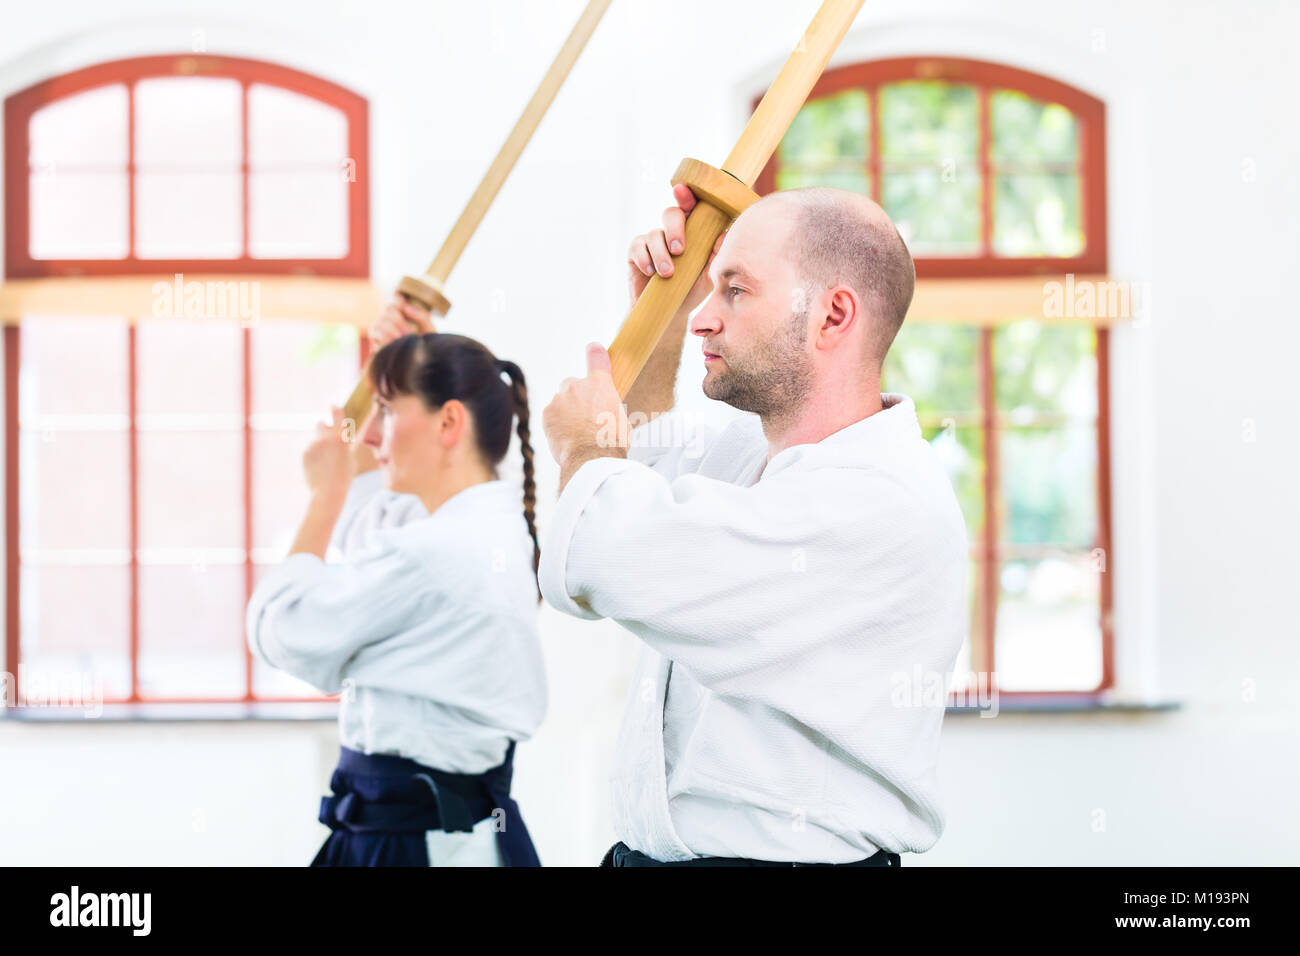 Man and woman having Aikido sword fight Stock Photo